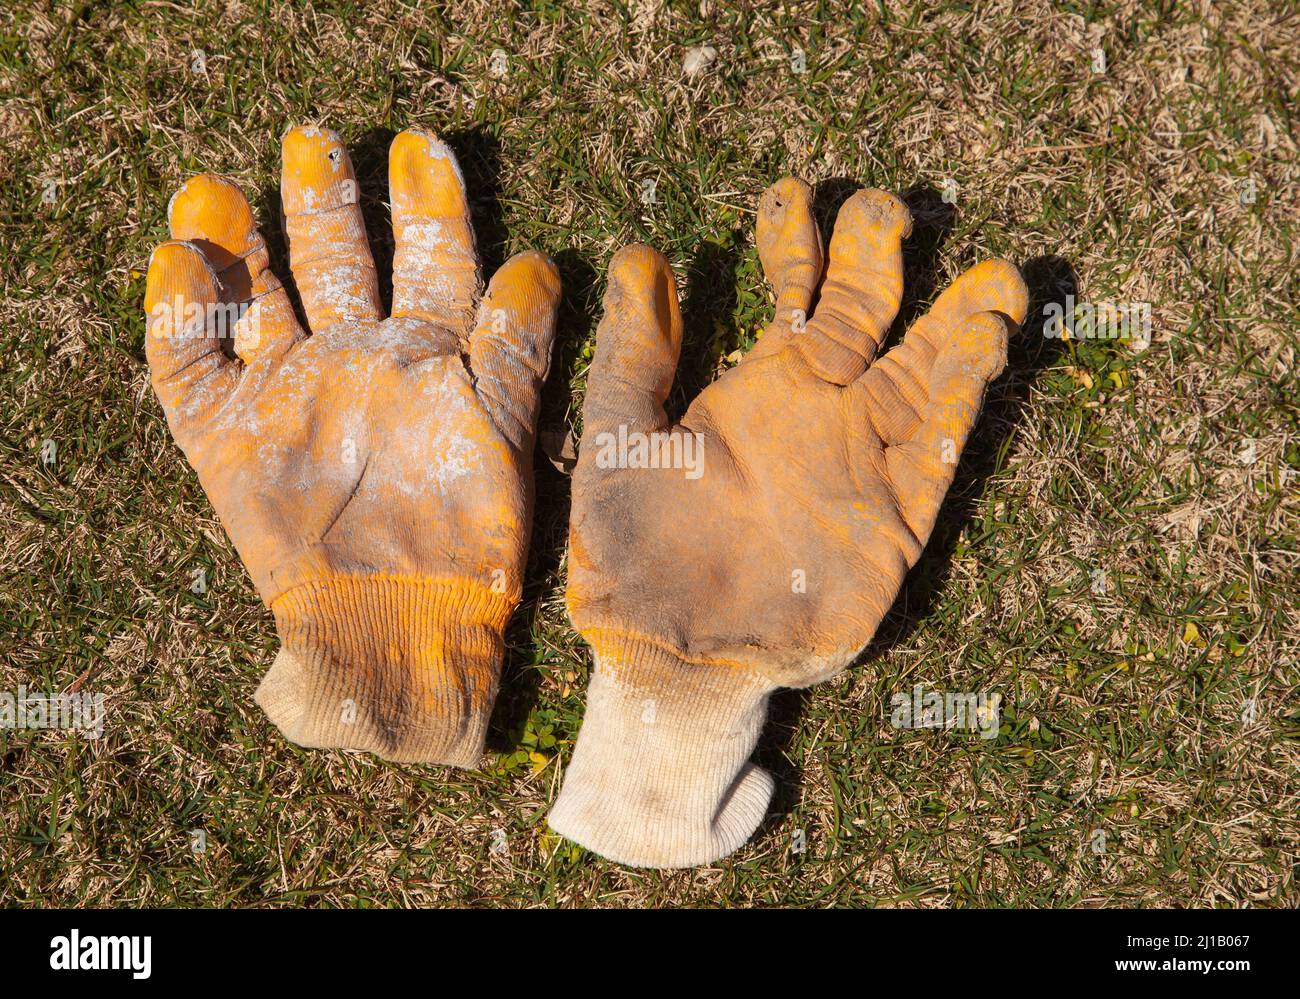 Used yellow working gloves on the grass. Worn work gloves. Top of view. Stock Photo